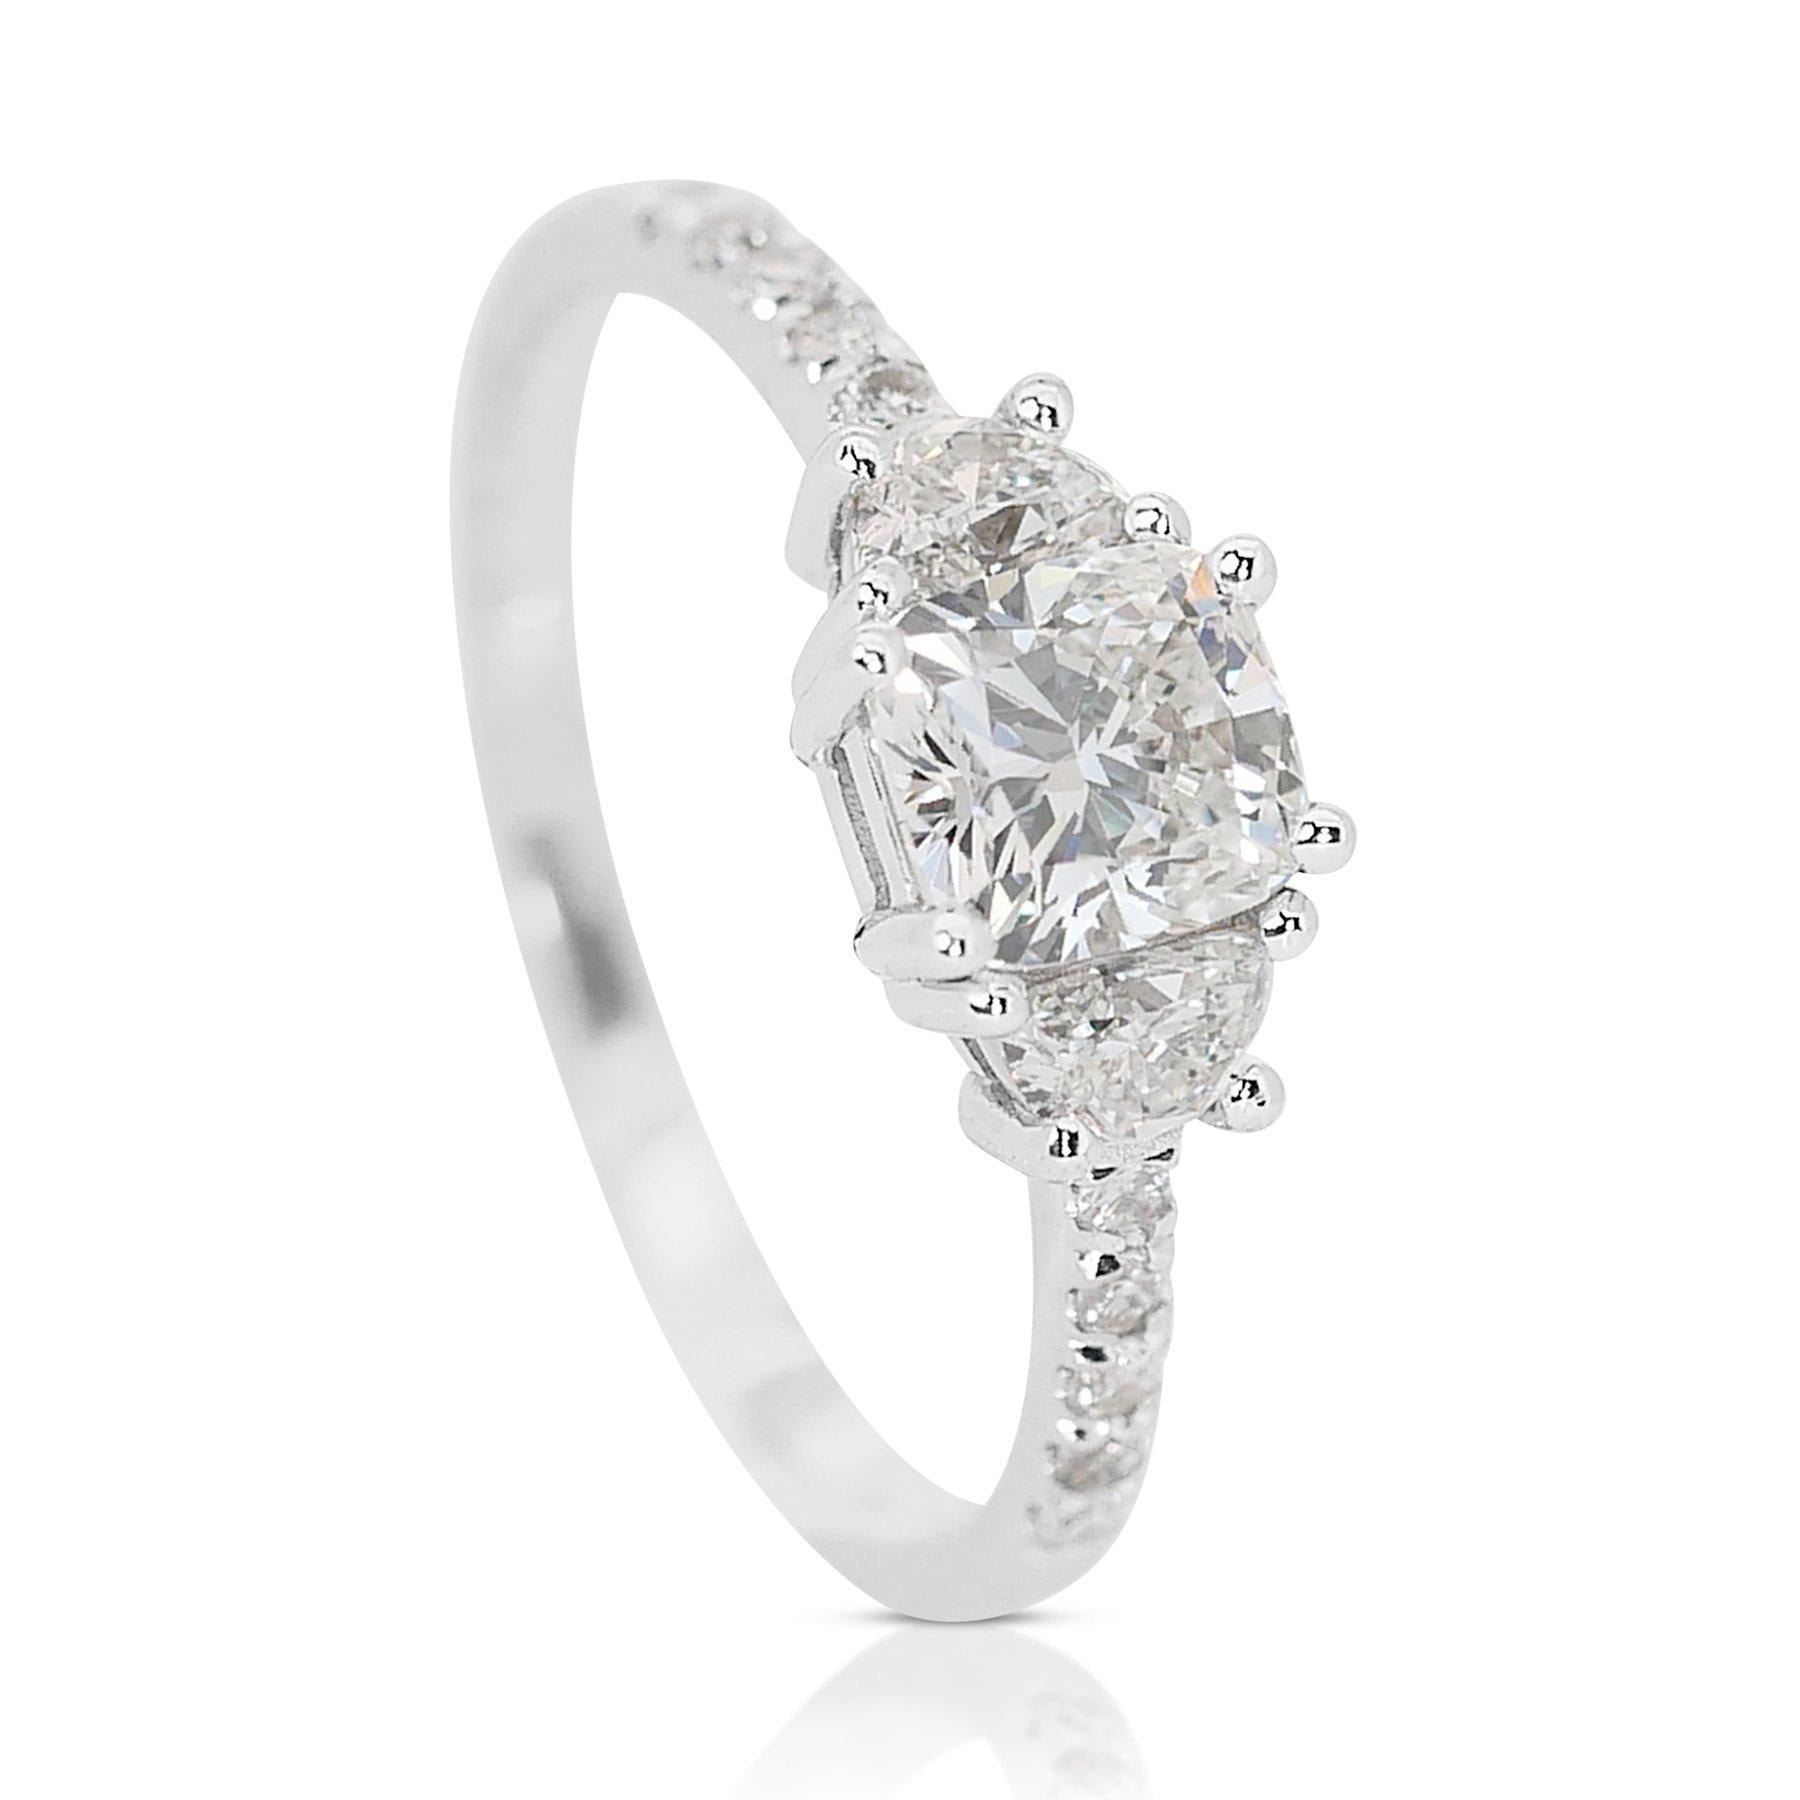 Luxurious 1.42ct Cushion Diamond Pave Ring in 18k White Gold - GIA Certified

This exquisitely designed diamond ring in 18k white gold features a magnificent 1.02-carat cushion-cut main diamond. The centerpiece is flanked by 2 unique